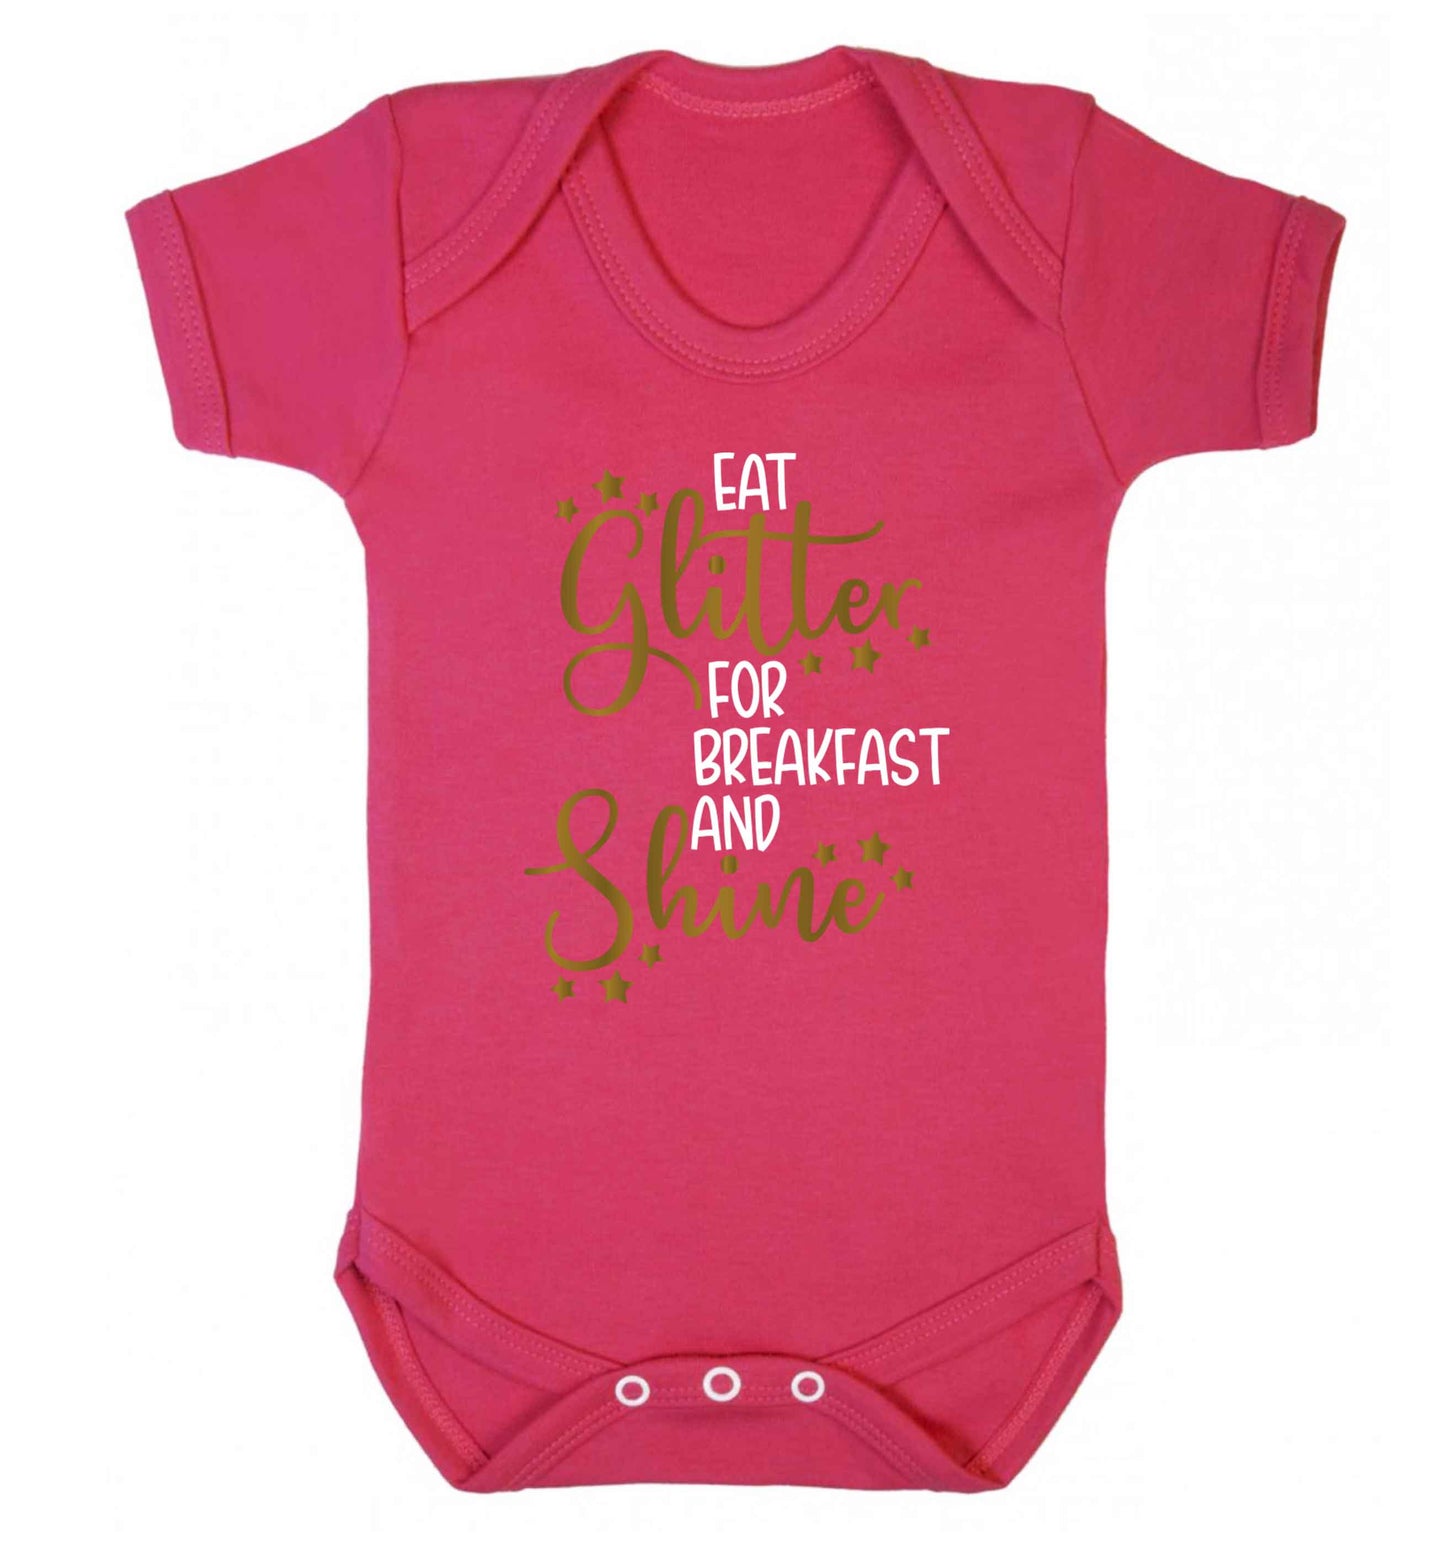 Eat glitter for breakfast and shine all day Baby Vest dark pink 18-24 months